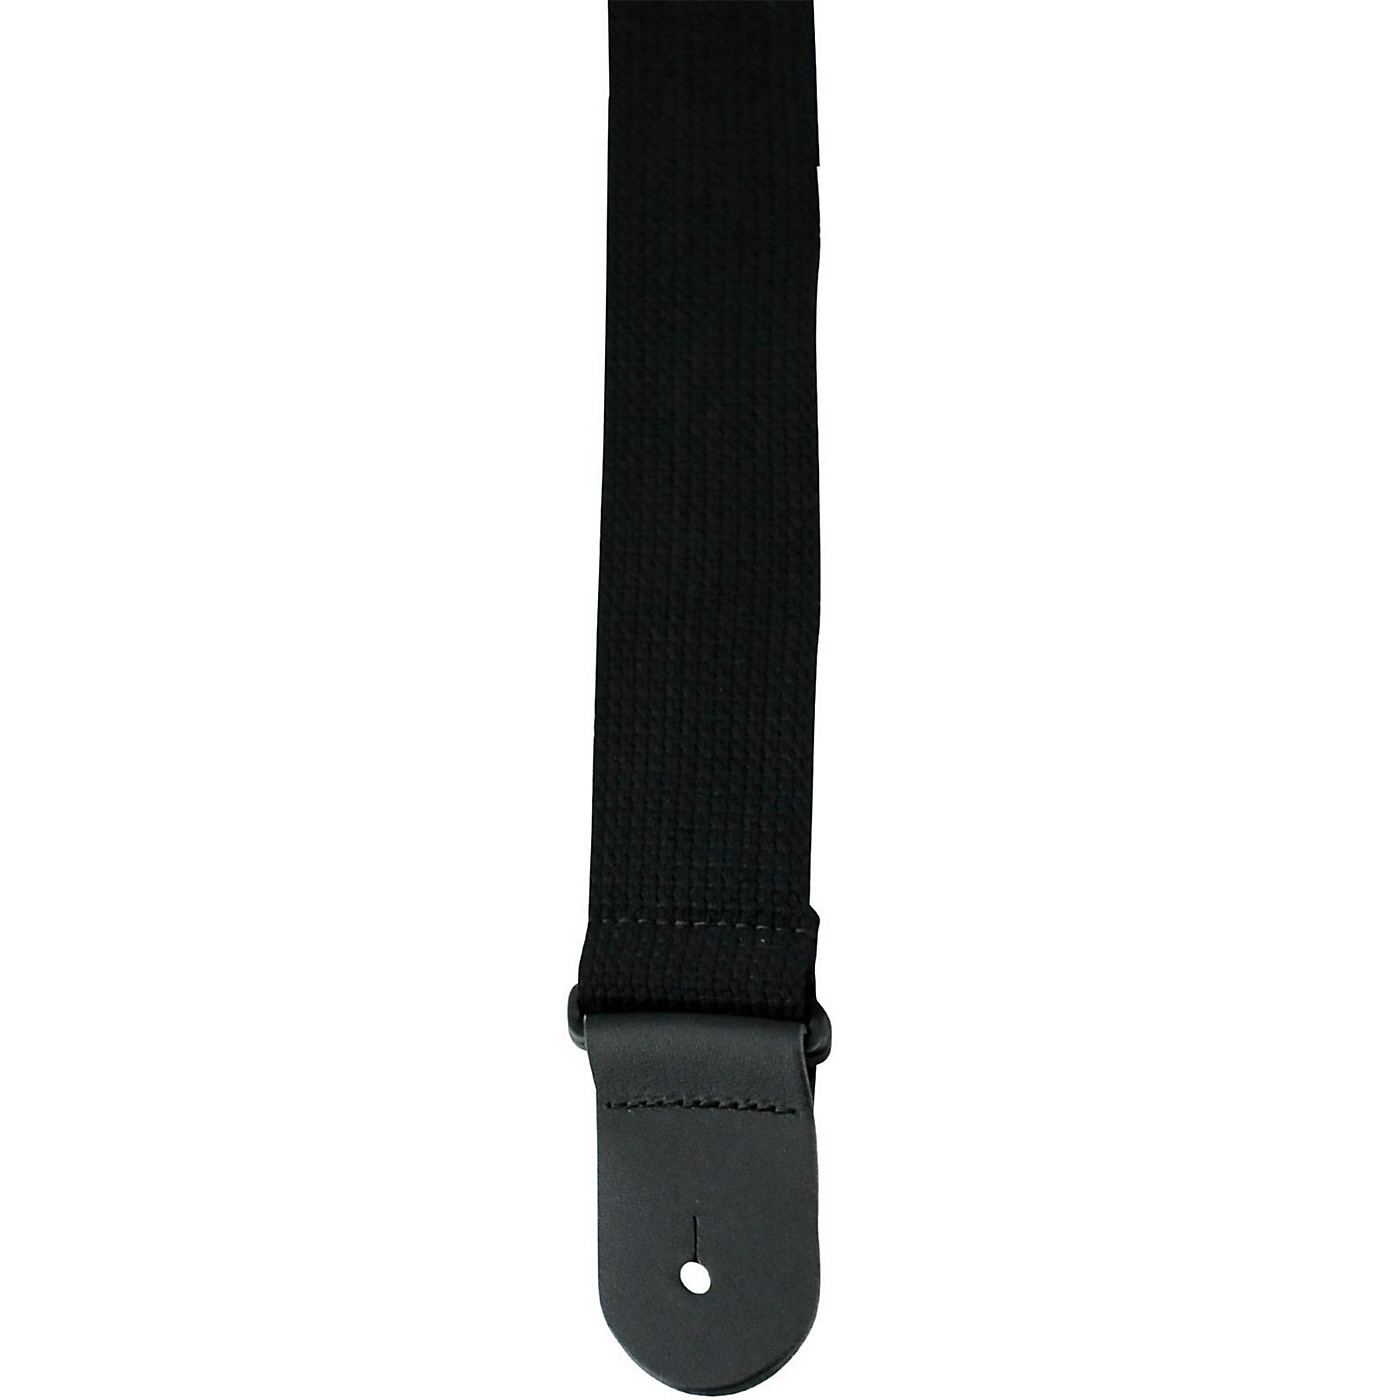 Perri's 2 in. Cotton Guitar Strap with Leather Ends Black - Woodwind ...